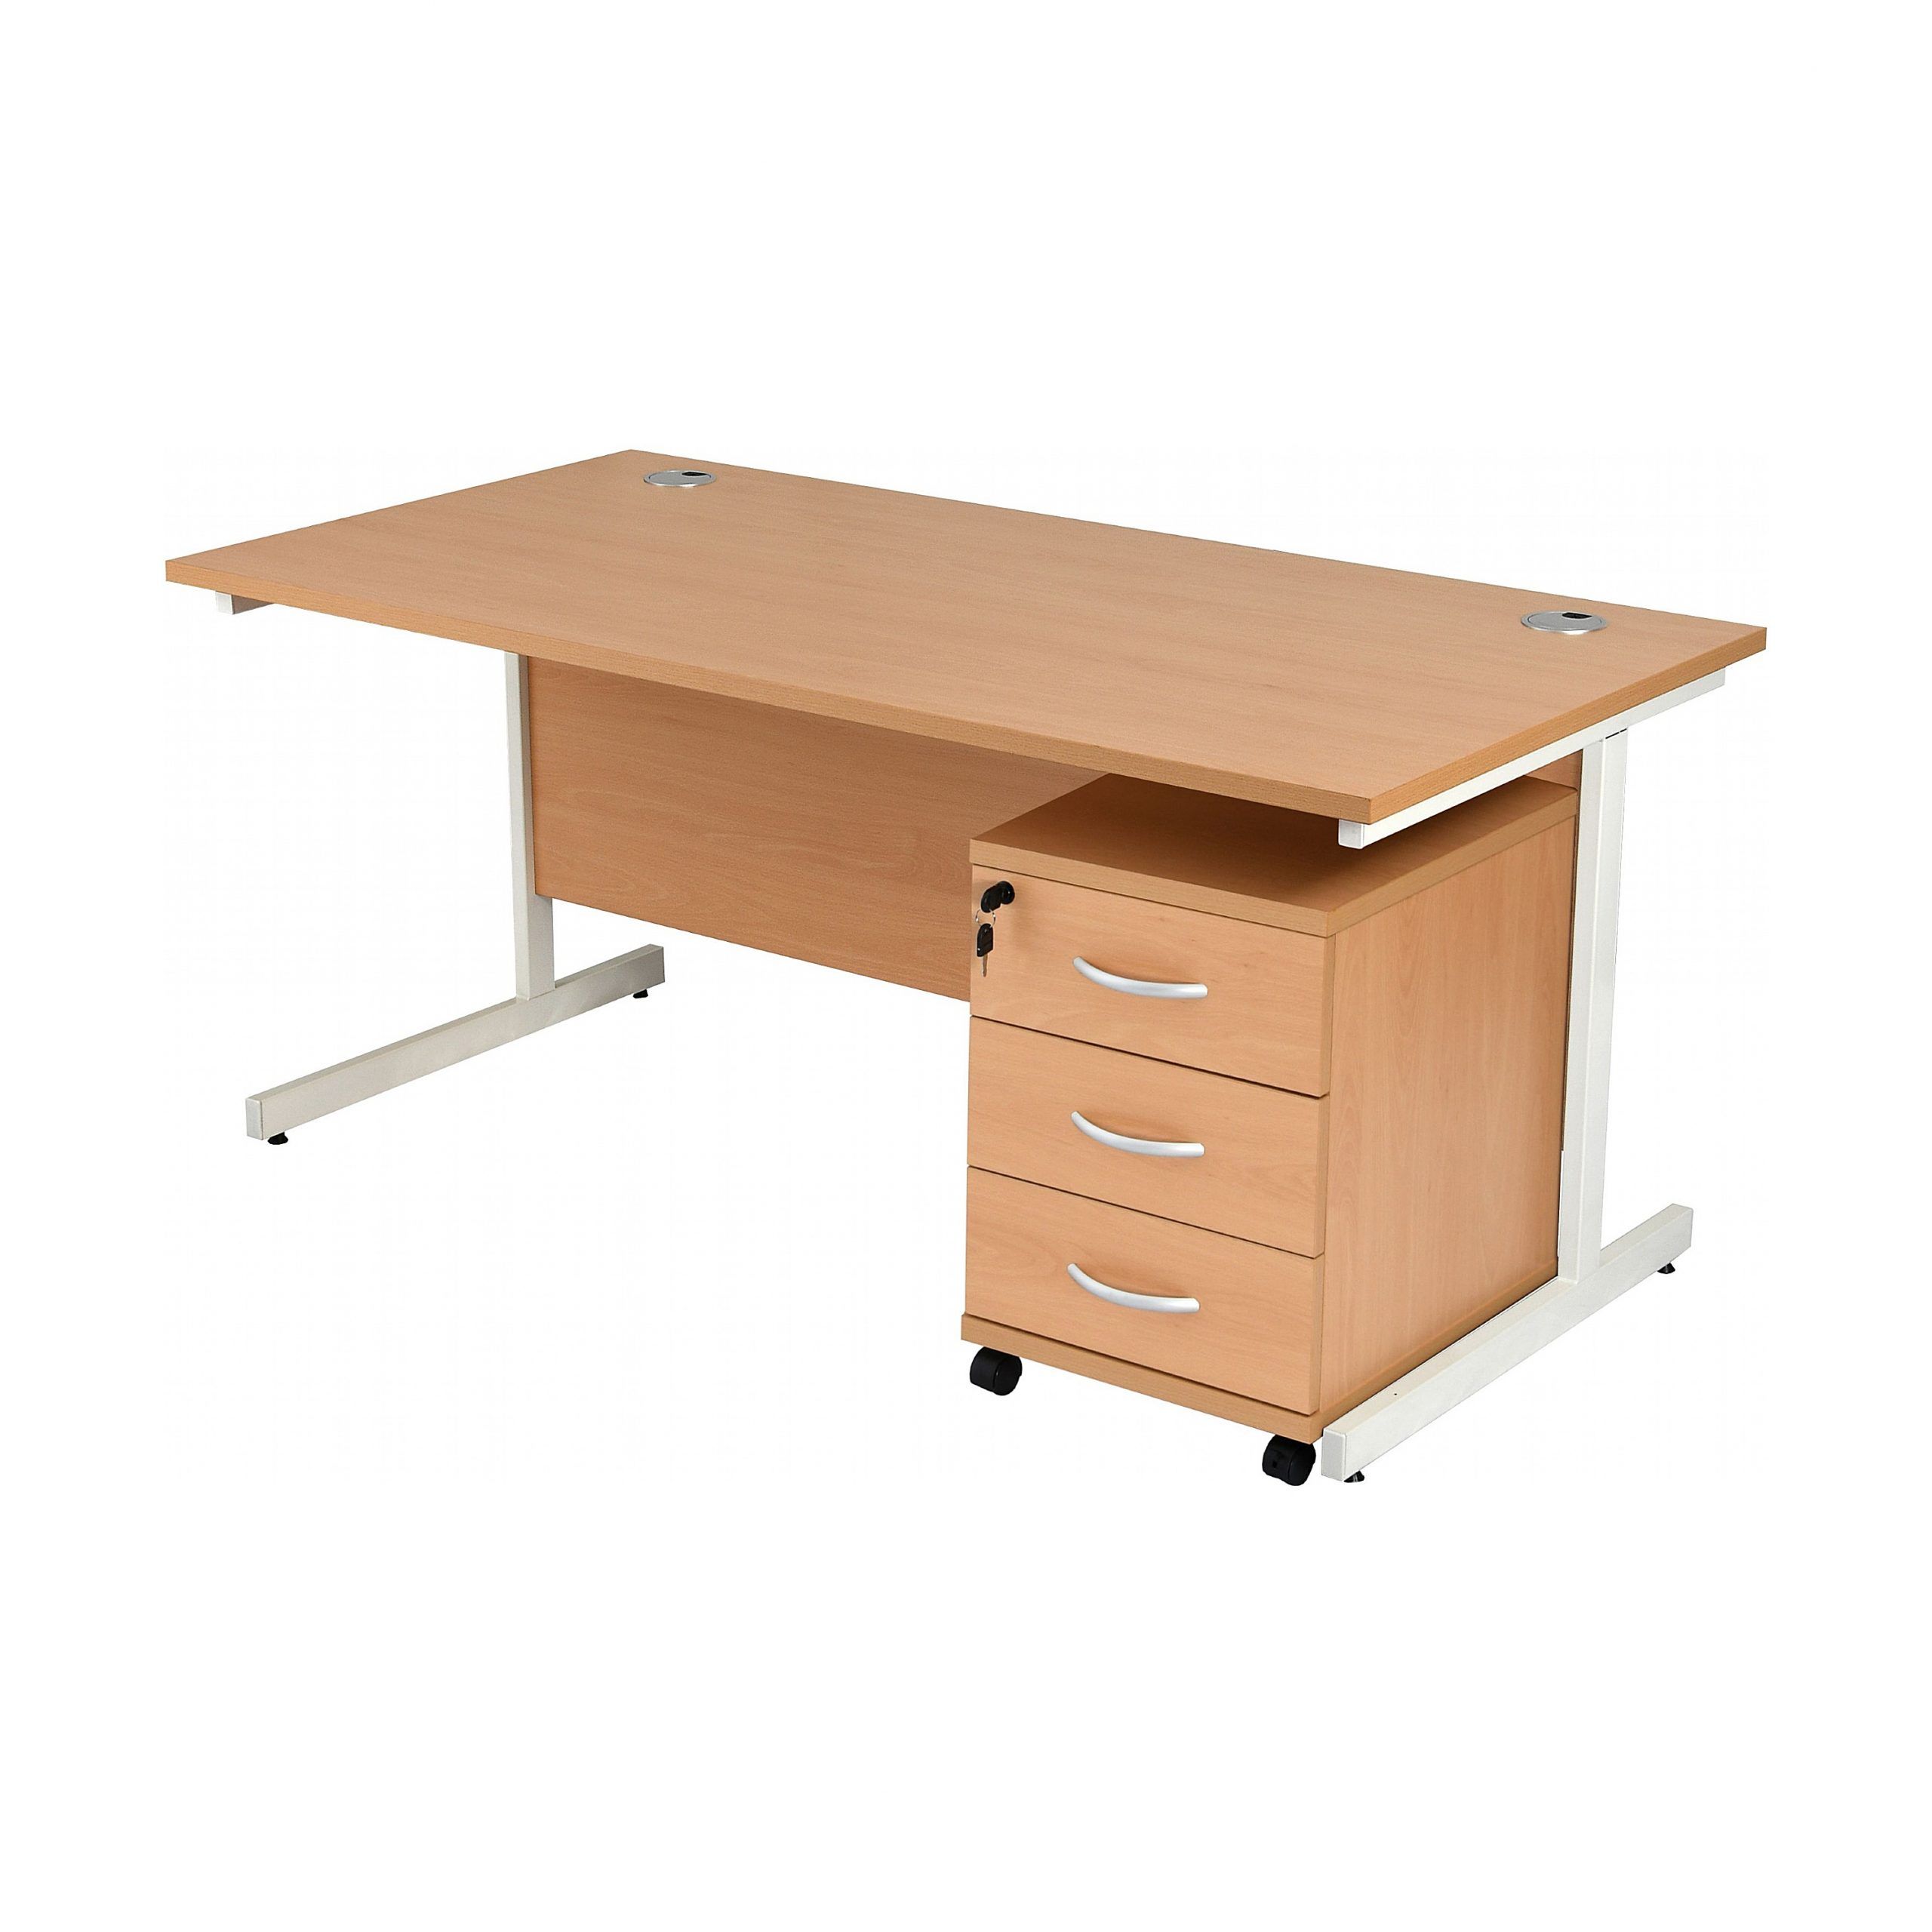 Fashionable Graphite 2 Drawer Compact Desks With Next Day Karbon K1 Rectangular Cantilever Office Desks With Under Desk (View 14 of 15)